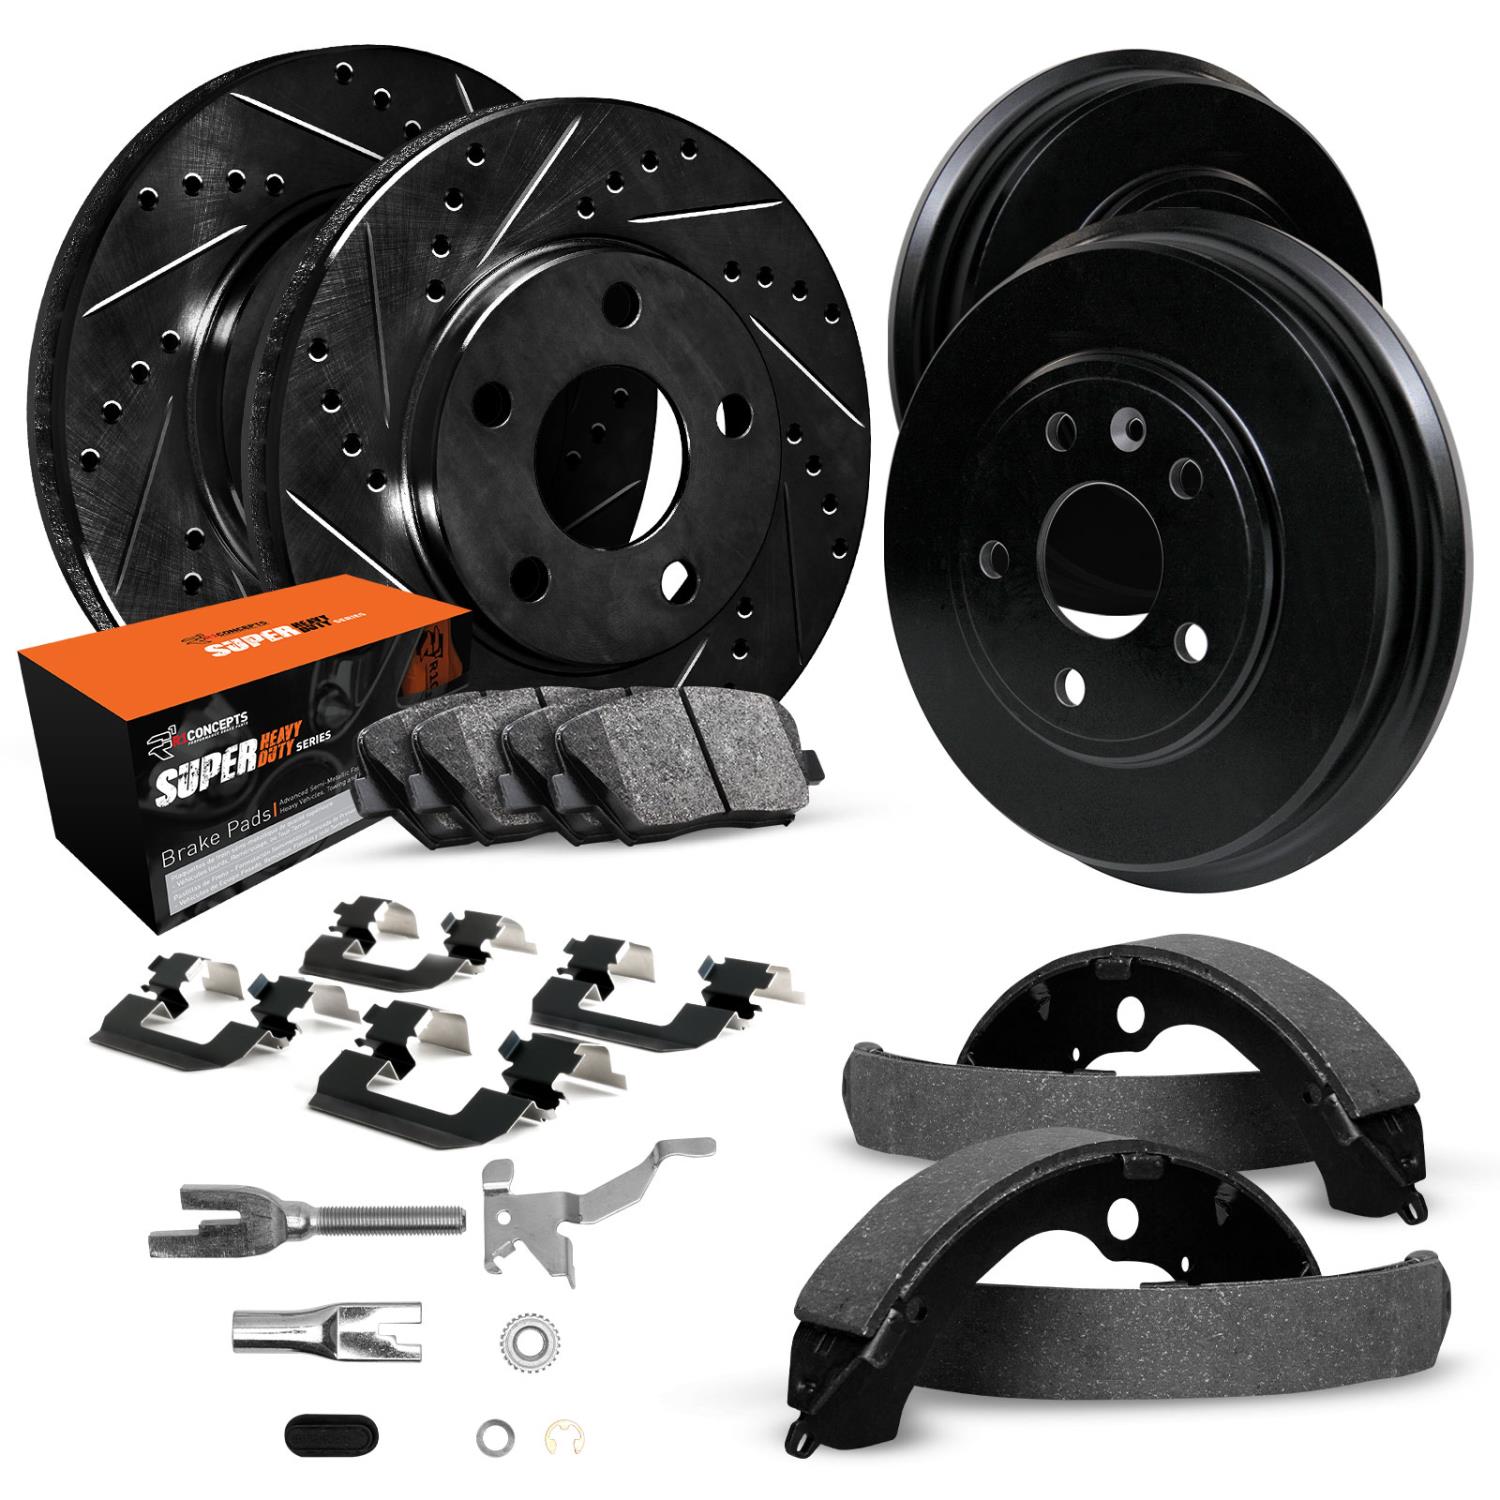 E-Line Slotted Black Brake Rotor & Drum Set w/Super-Duty Pads, Shoes, Hardware/Adjusters, 1986-1993 Ford/Lincoln/Mercury/Mazda